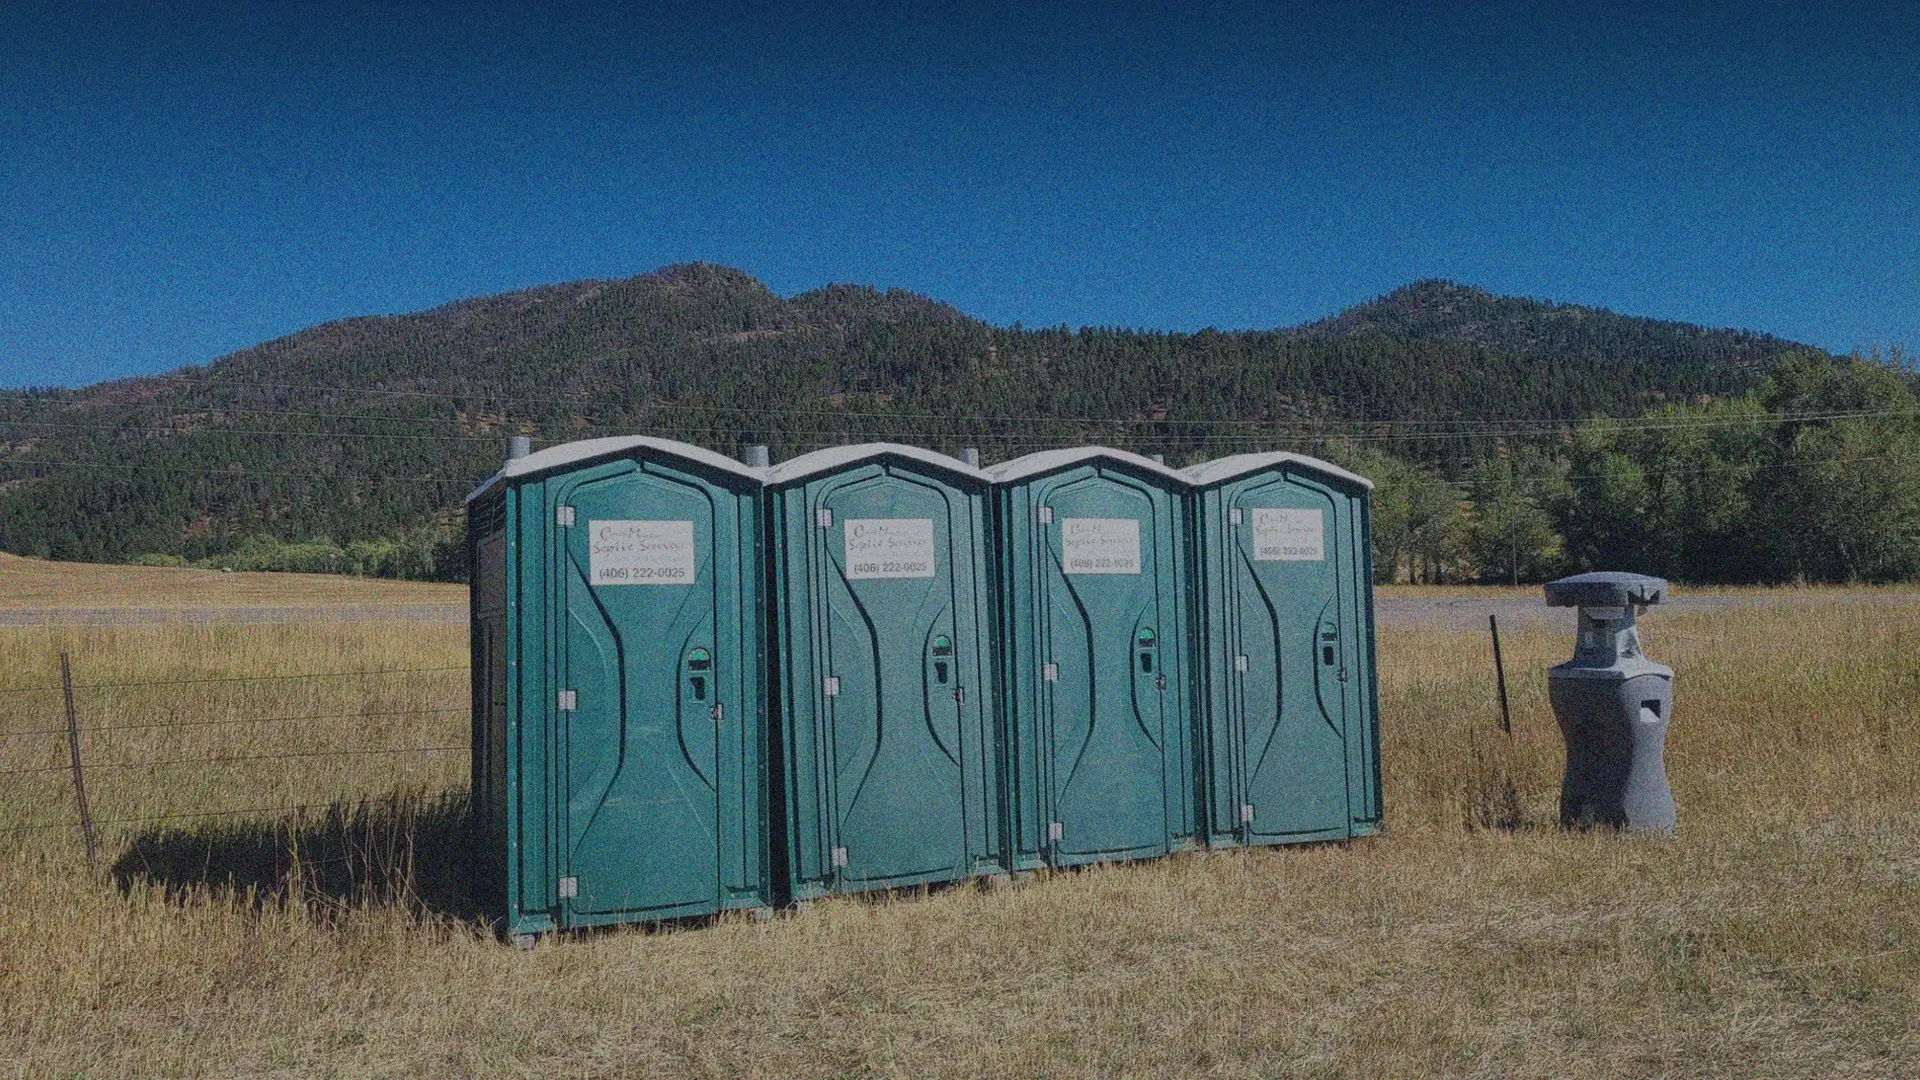 Creative Names For Portable Toilet Businesses - ServiceCore